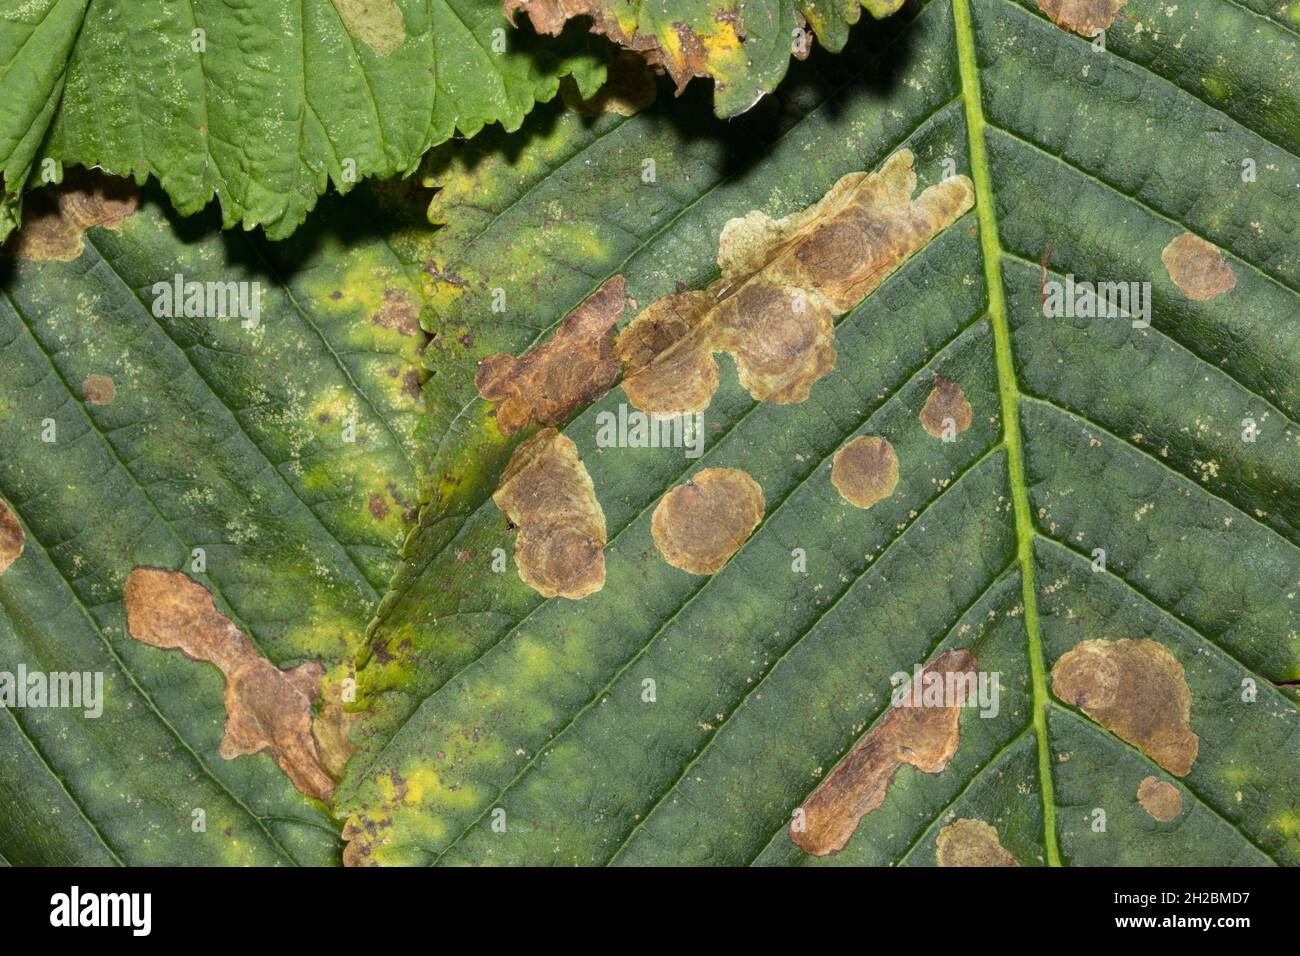 Horse-chestnut Leaf Blight, or Rust, is a fungal infection specific to the Horse-chestnut tree. The Horse-chestnut tree was introduced to the UK Stock Photo